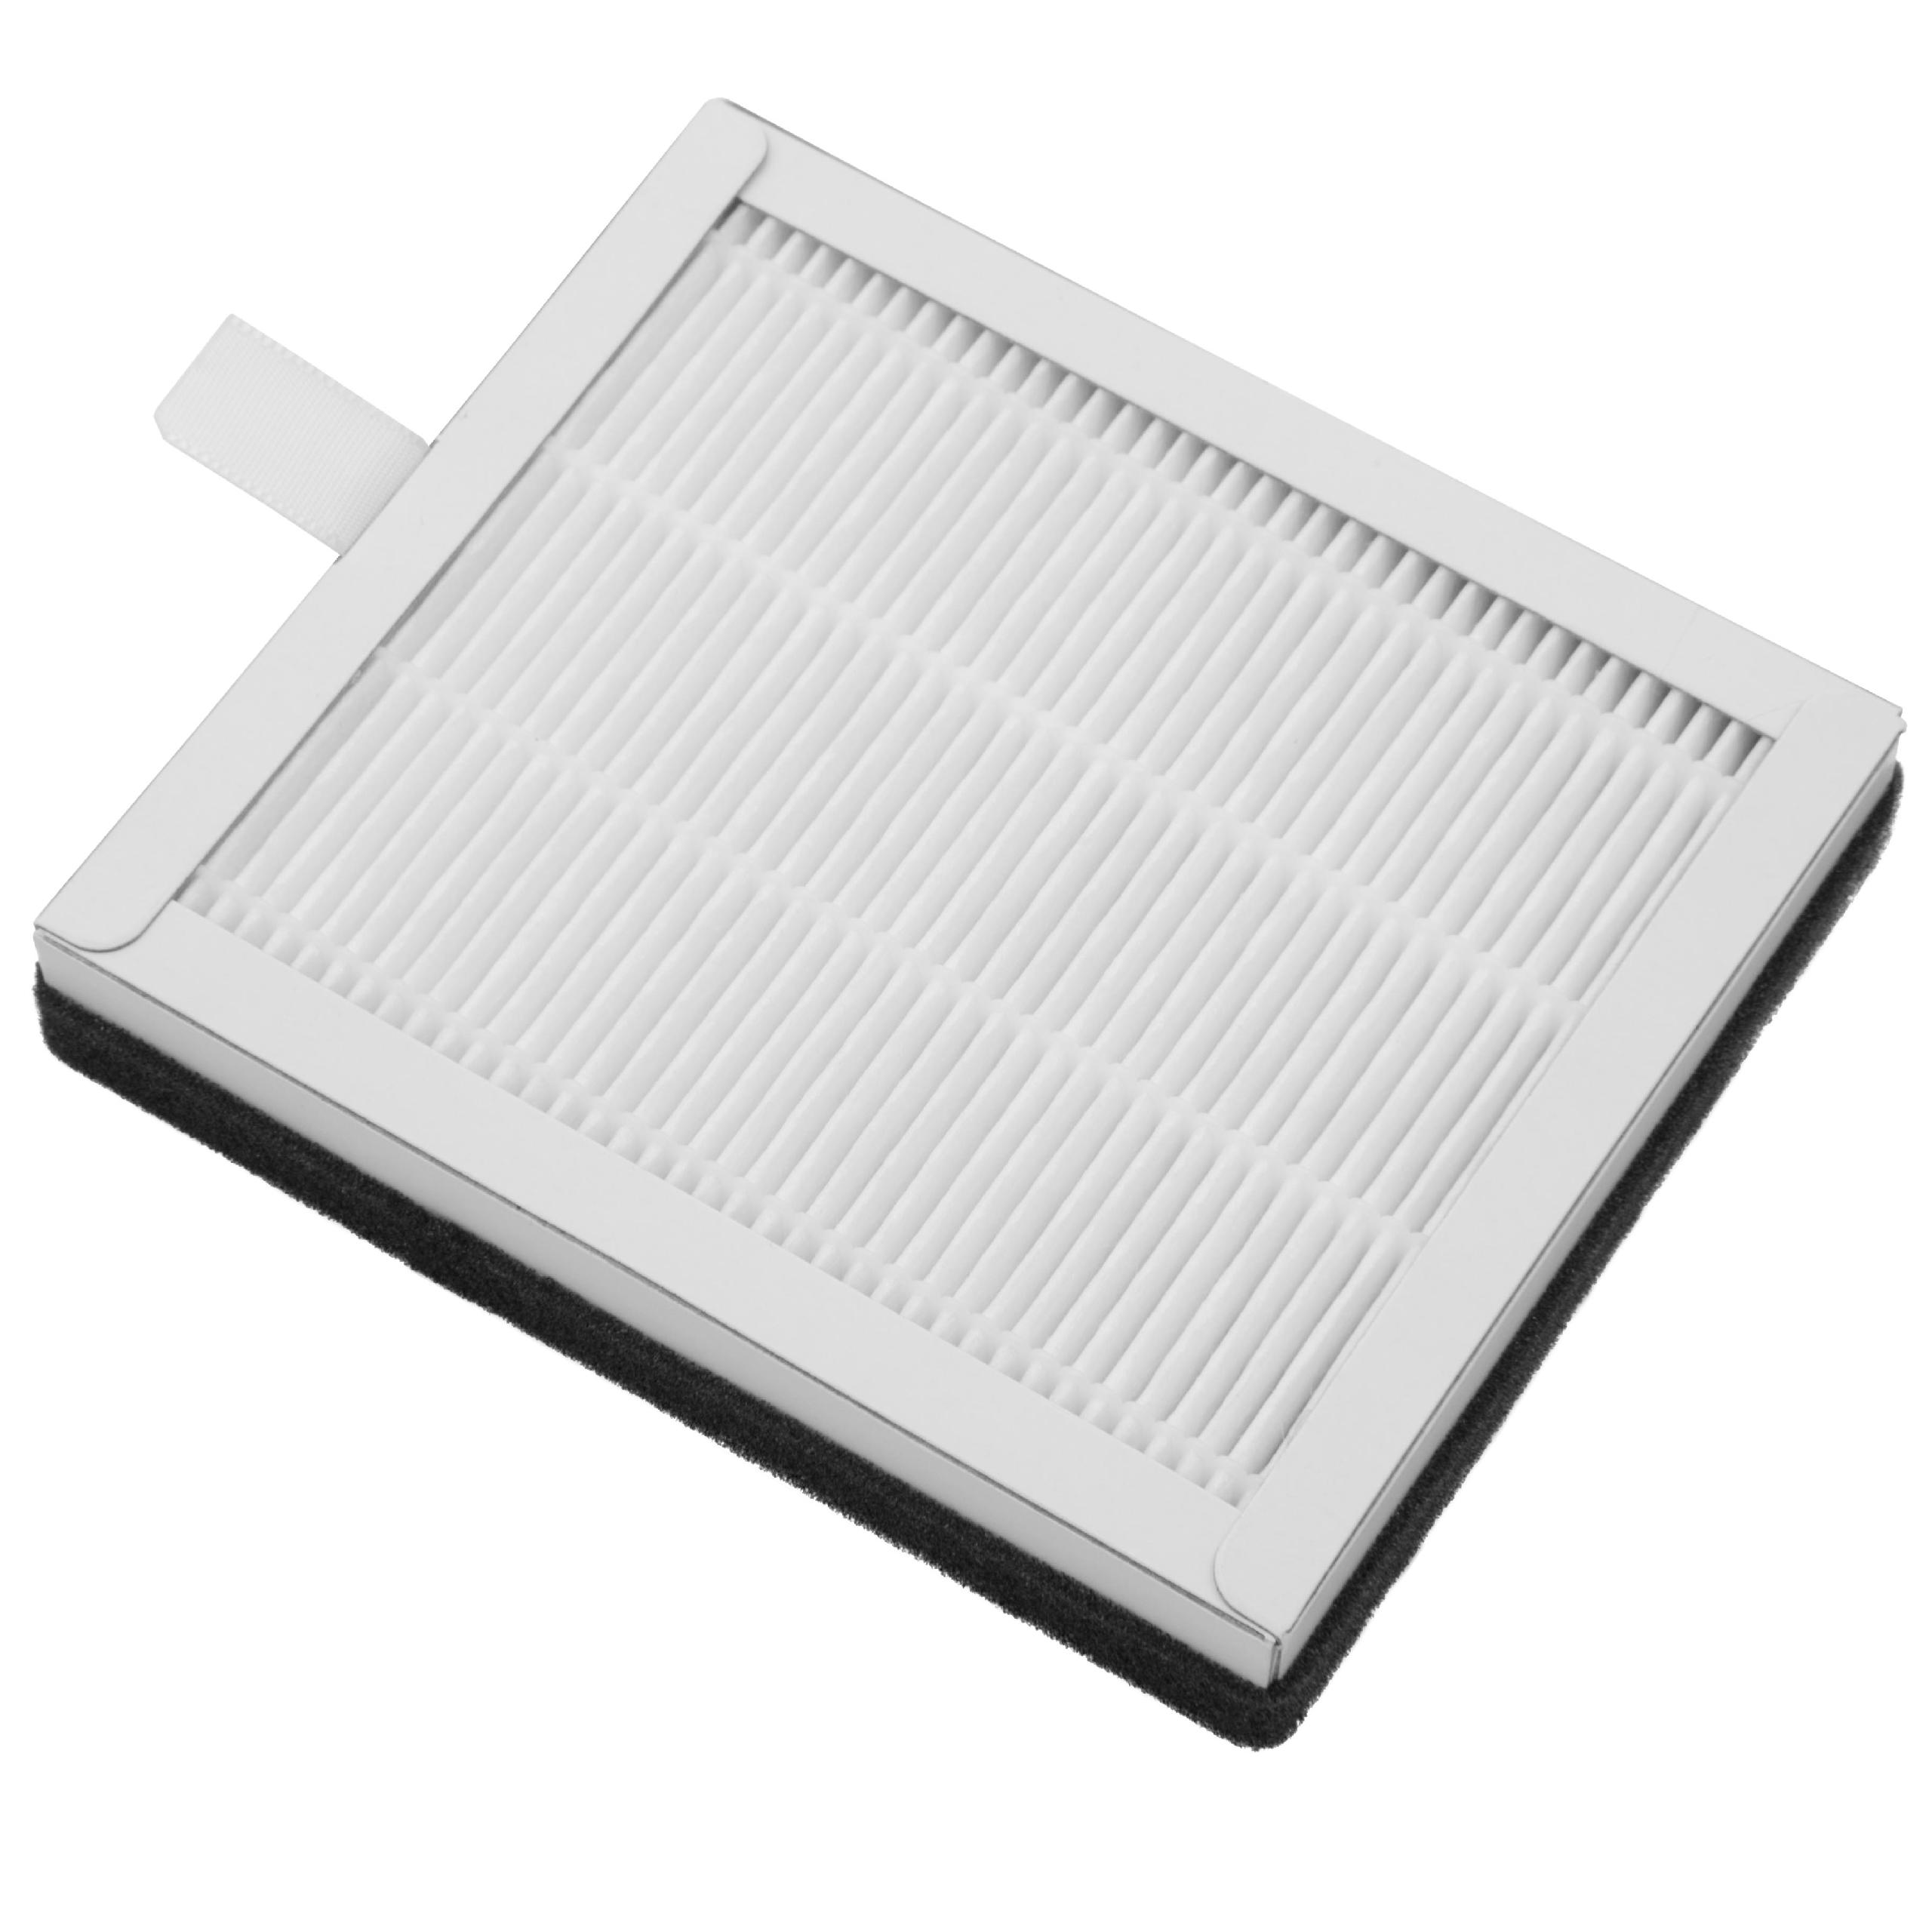 Filter as Replacement for Soehnle 68105 etc. - Pre Filter + EPA, 12.3 x 10.5 x 1.9 cm